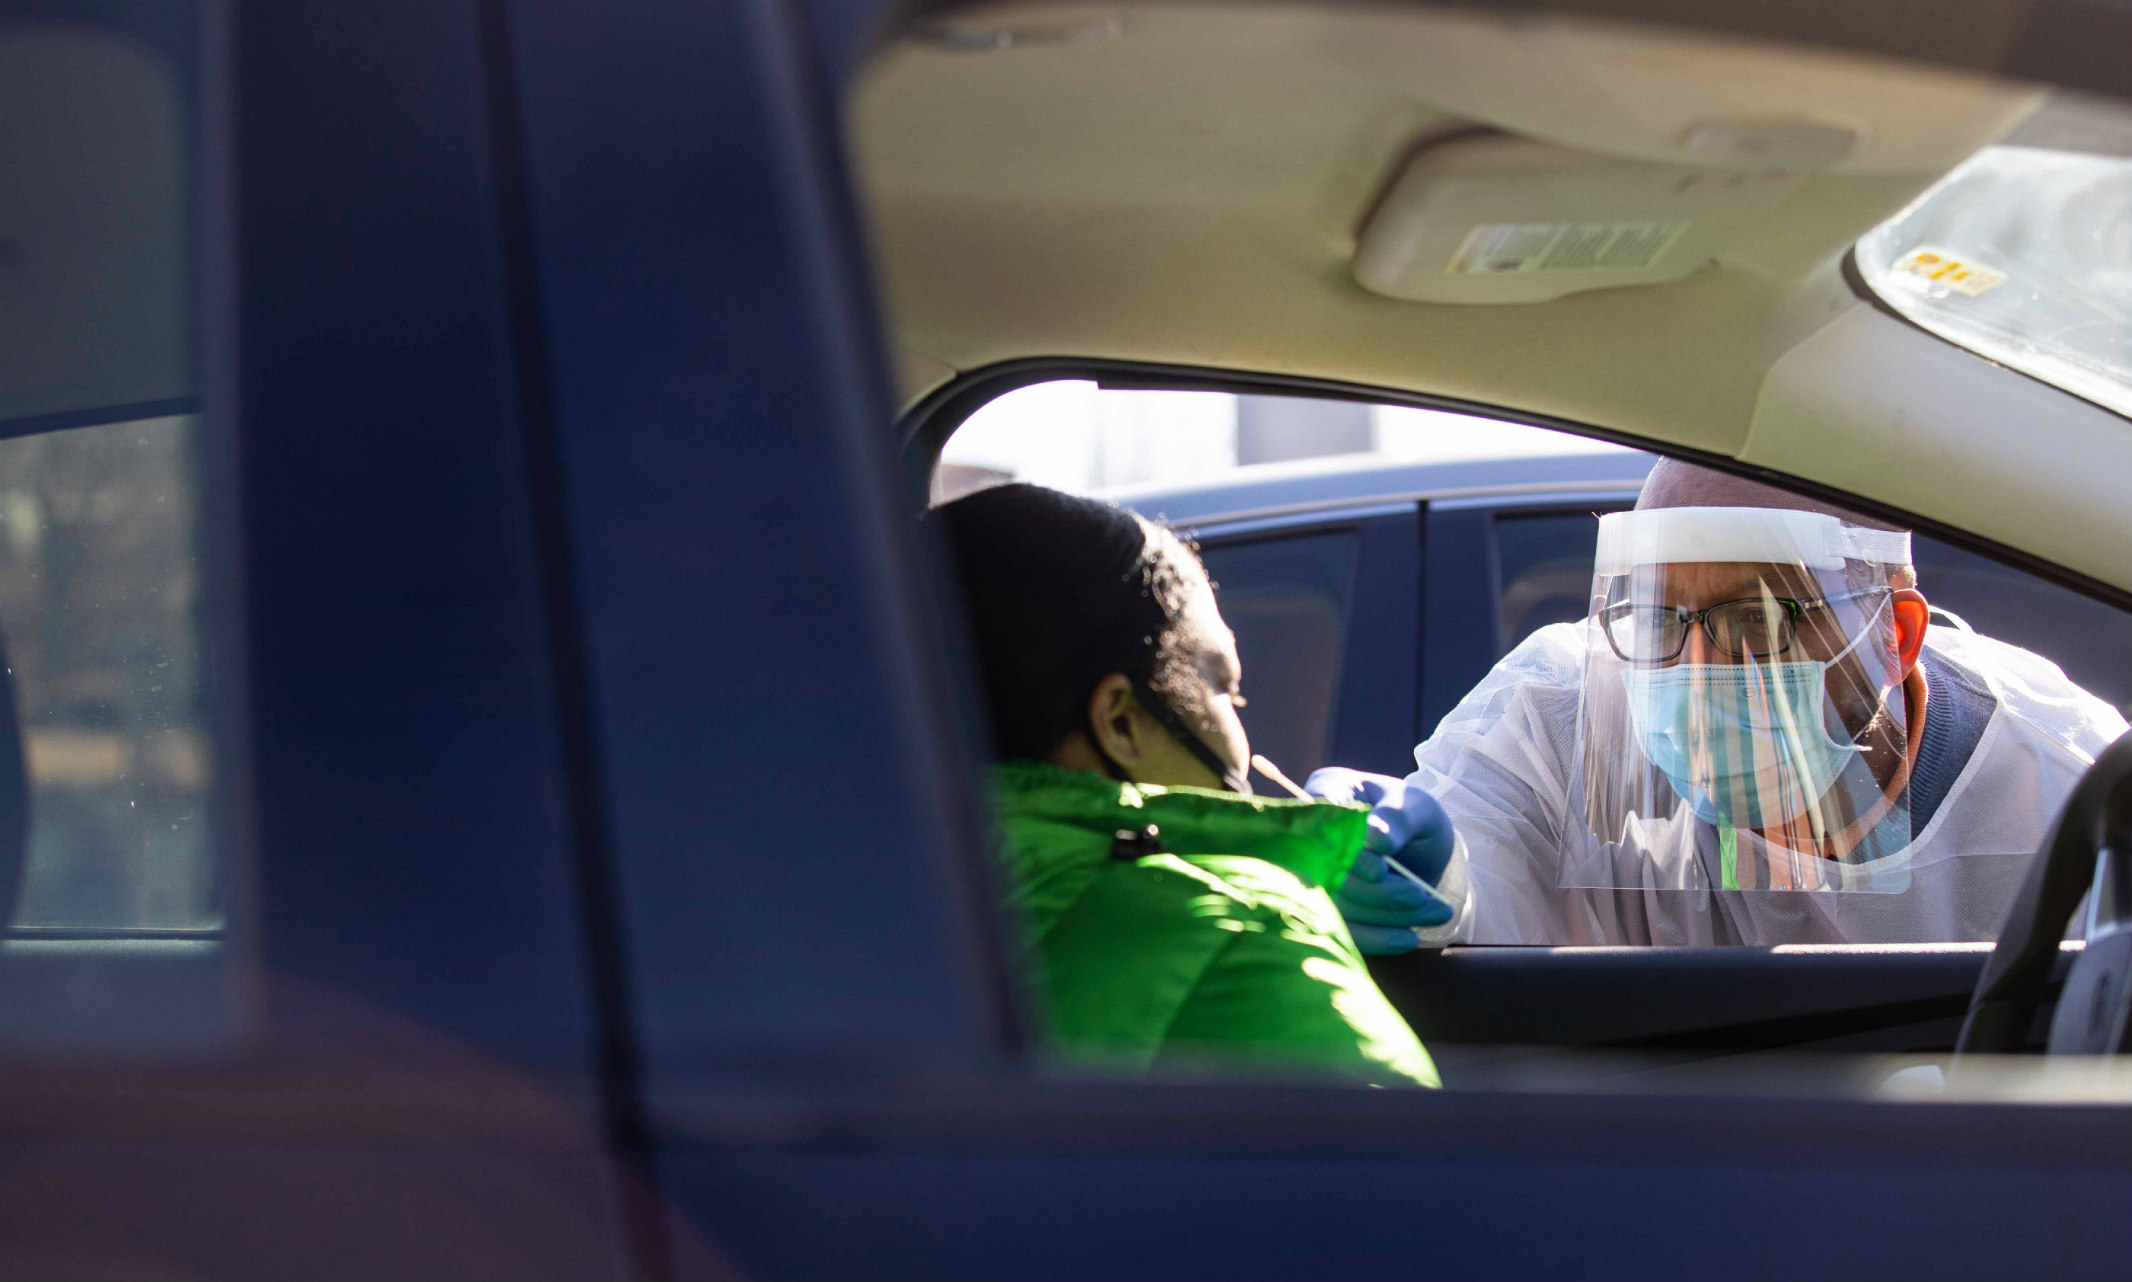 An image of Obie Austin wearing a face mask talking to a person sitting in a car.